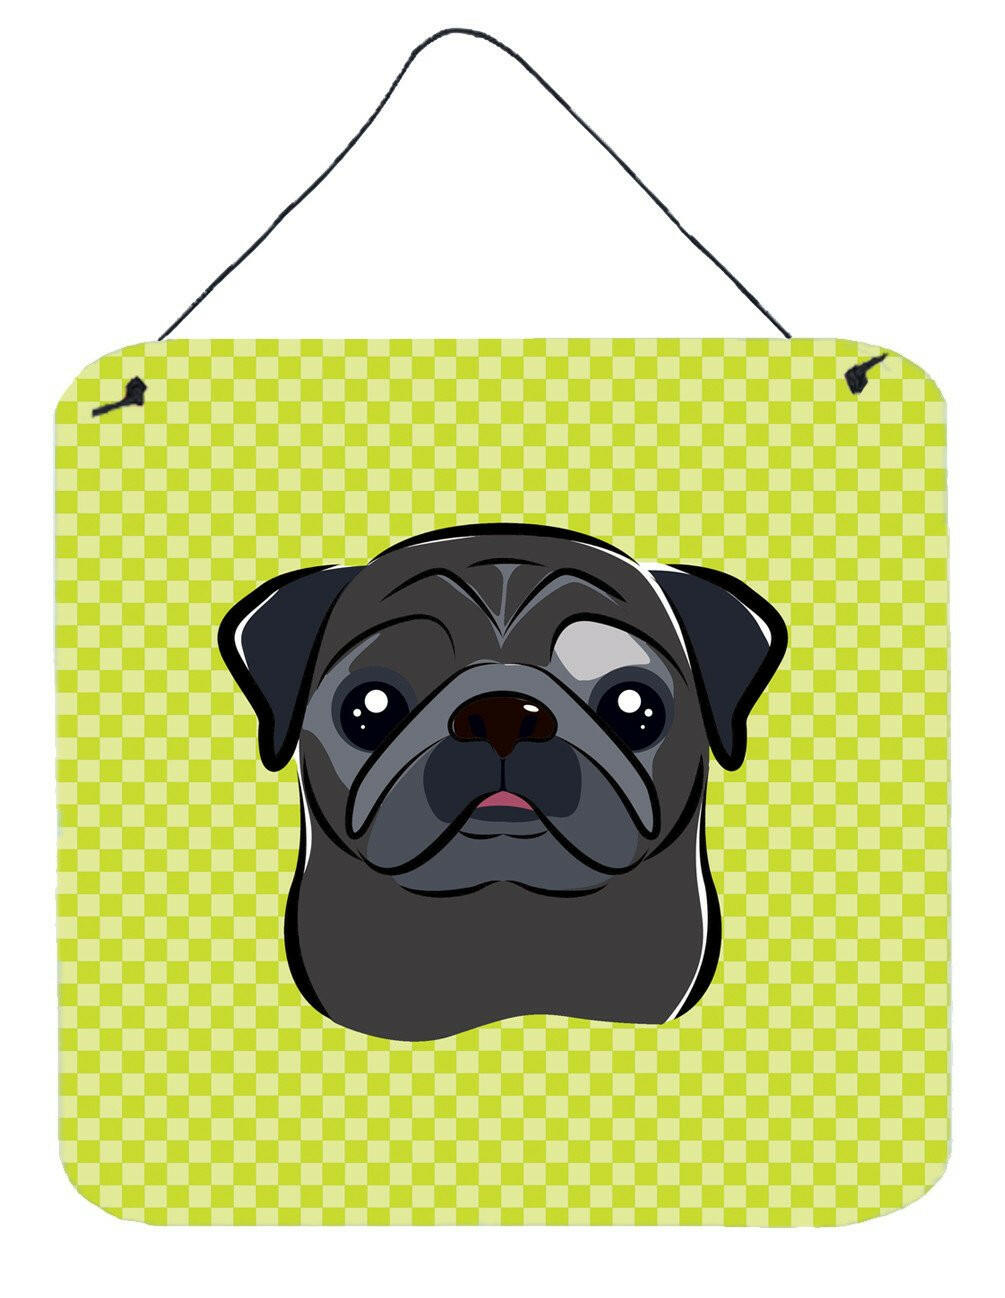 Checkerboard Lime Green Black Pug Wall or Door Hanging Prints BB1325DS66 by Caroline's Treasures